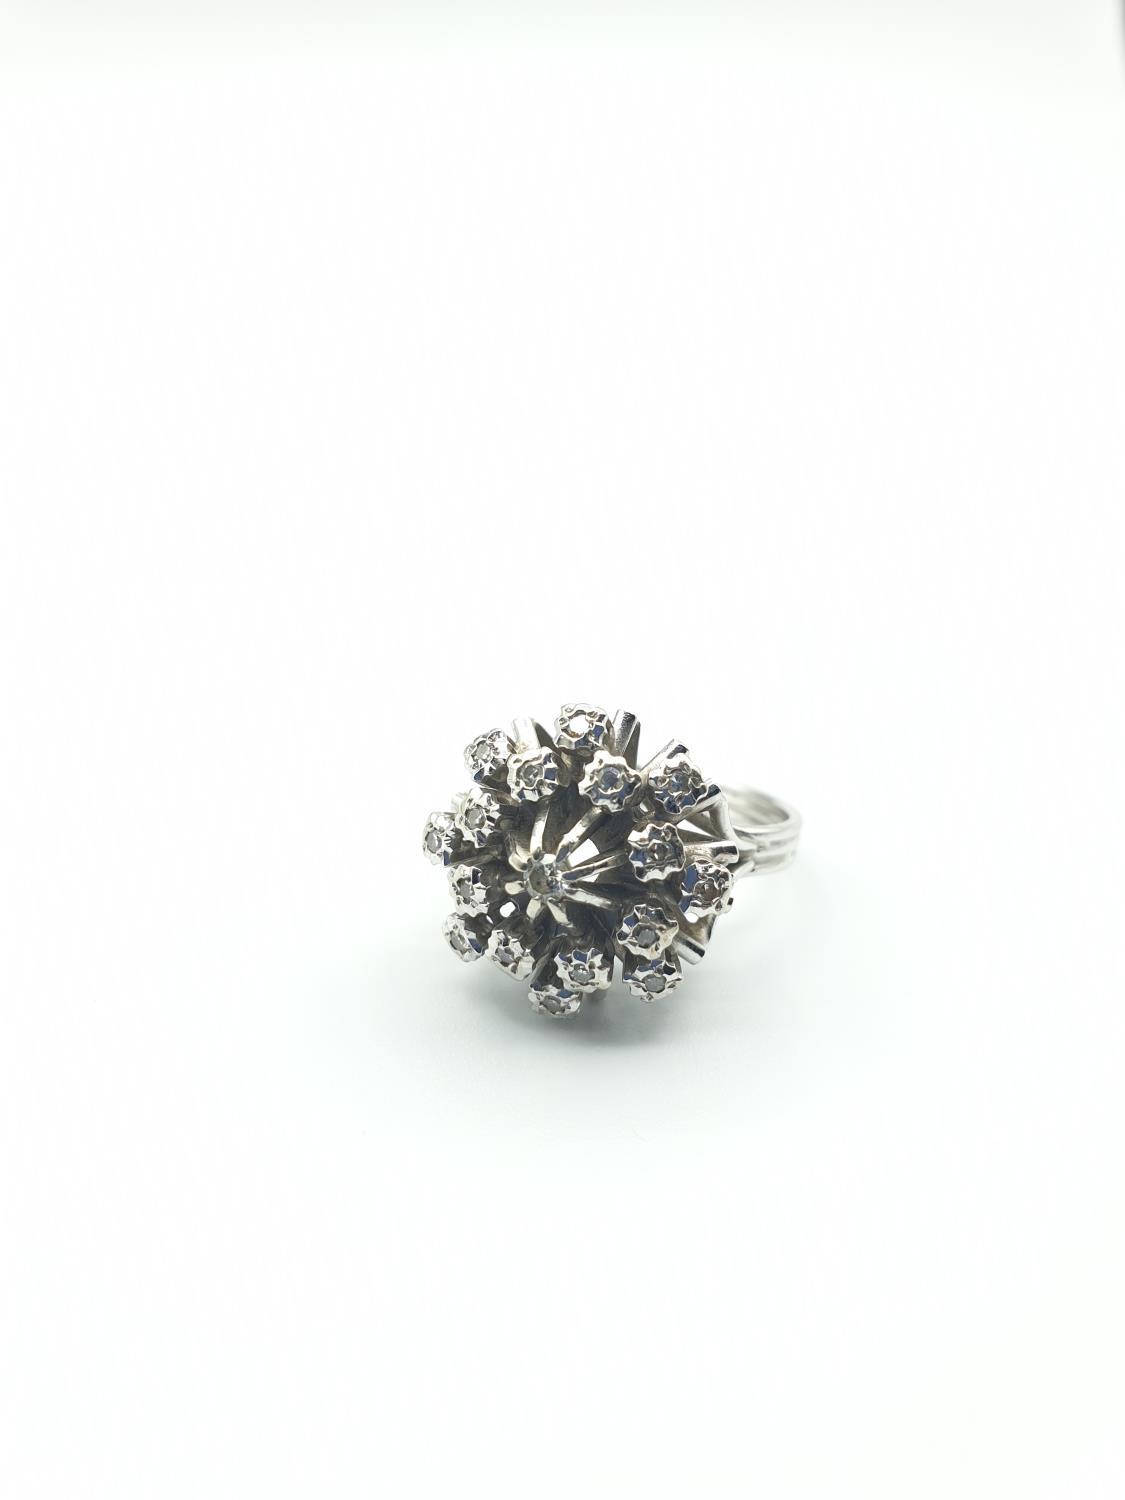 18CT WHITE GOLD DIAMOND CLUSTER RING, SIZE M WEIGHT 6.2G. Hallmark inside the band showing 750 for - Image 2 of 6